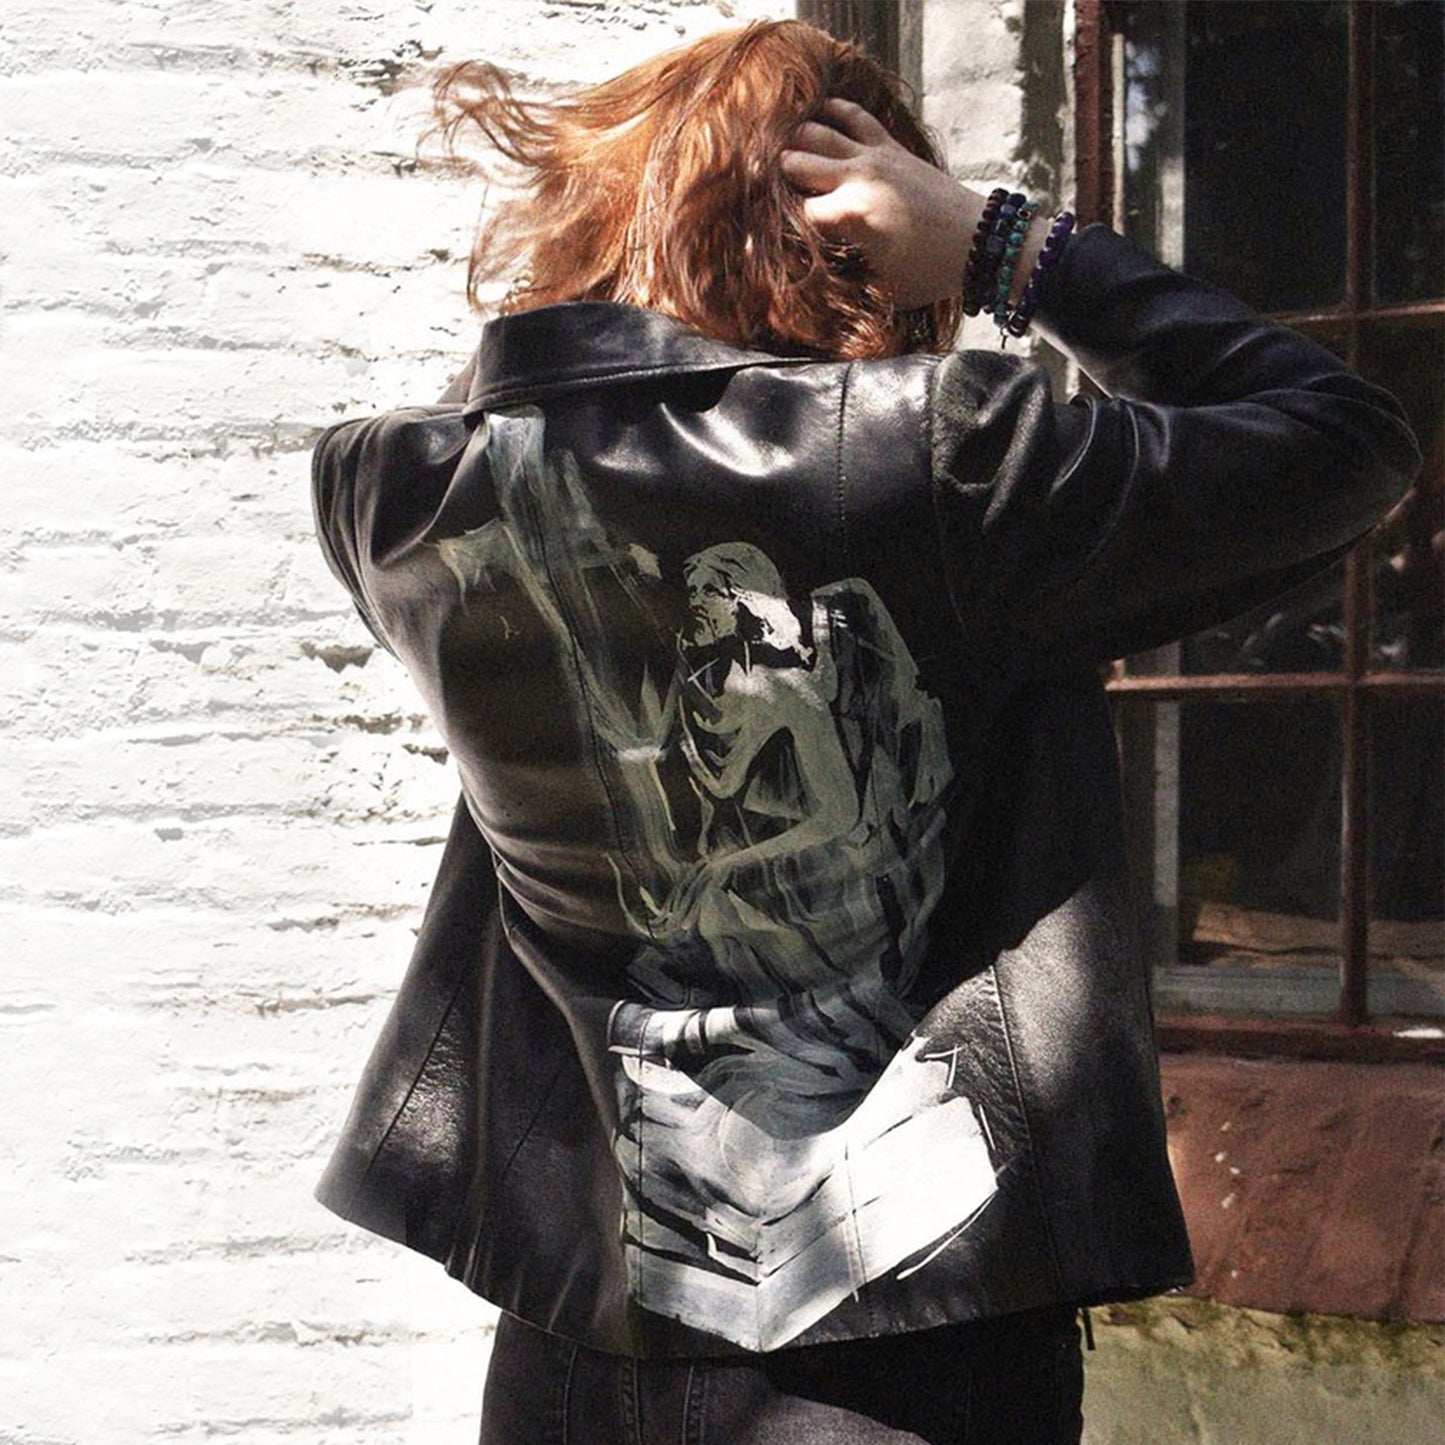 The Graveyard Shift - Leather Alfani Jacket - Size SM - Hand Painted by Mercy Vavra